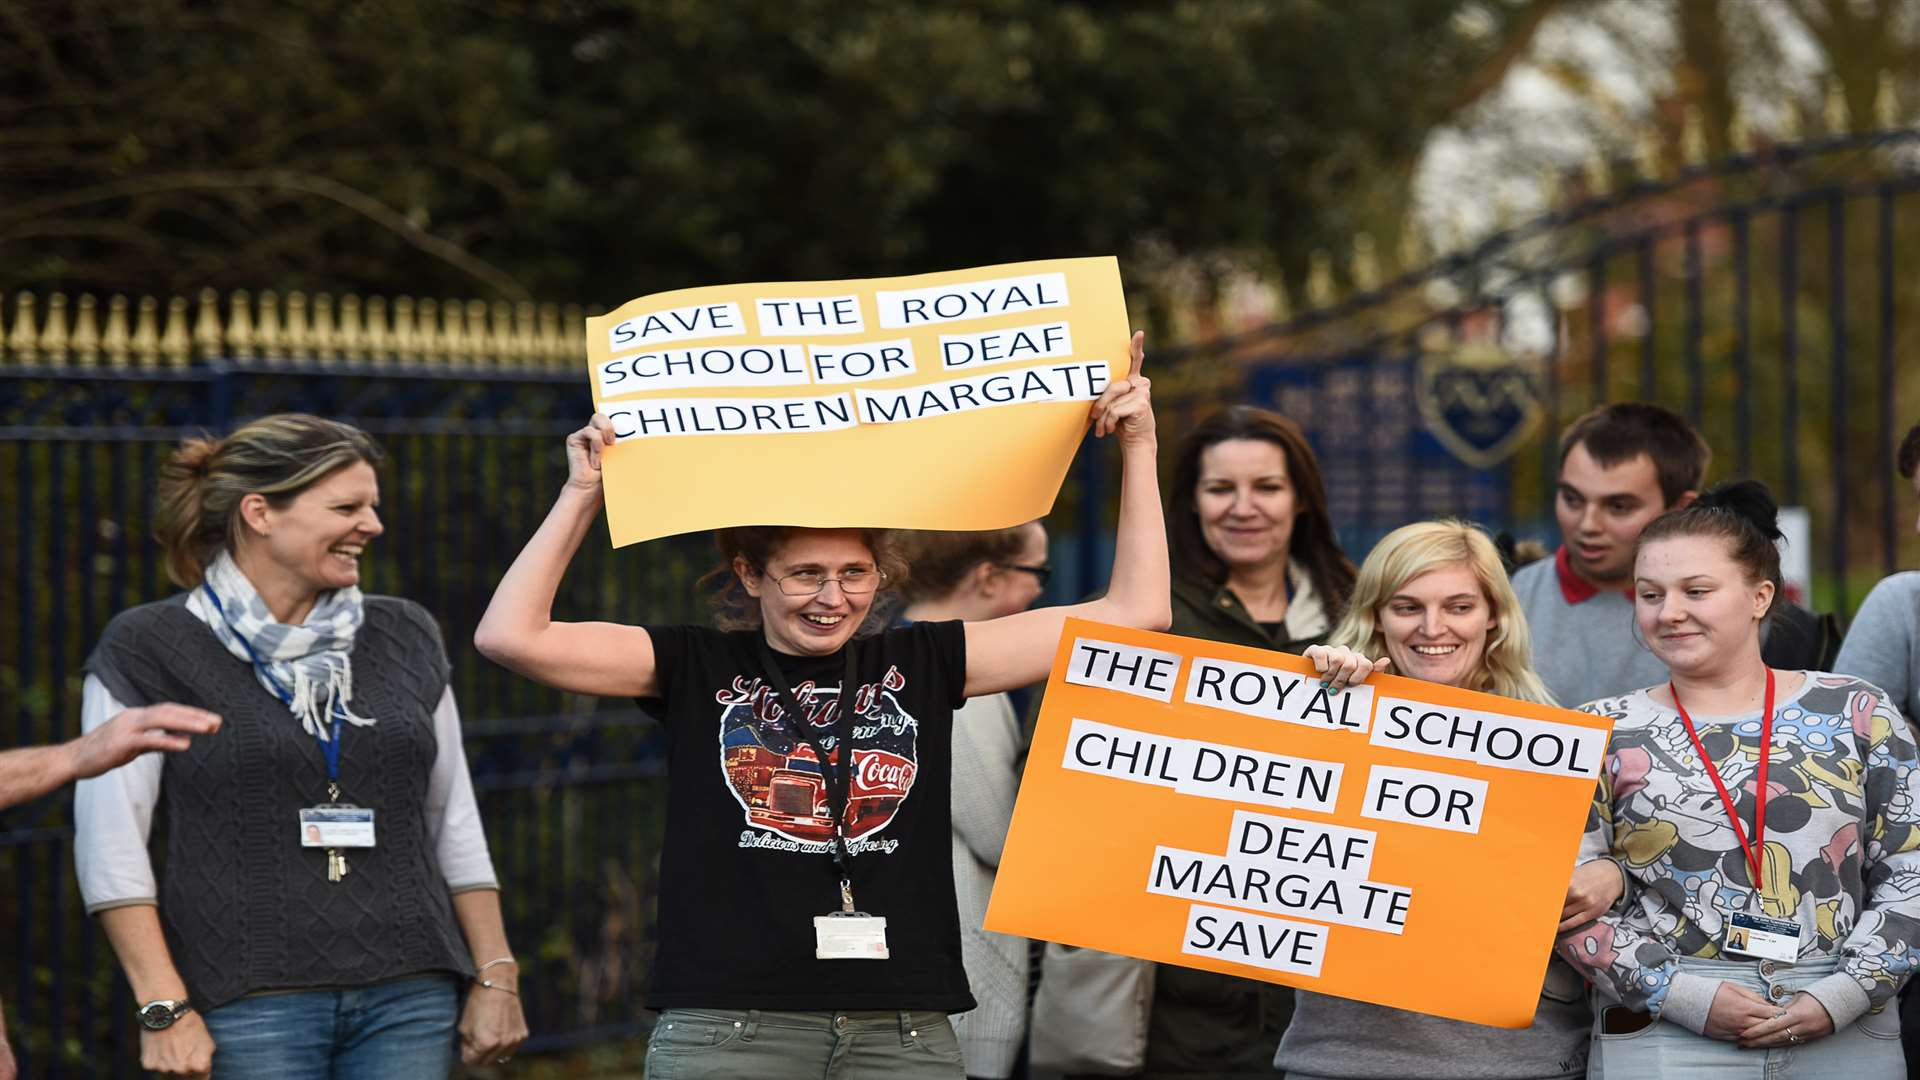 A protest was held outside of the Royal School for Deaf Children after it was placed into administration in December